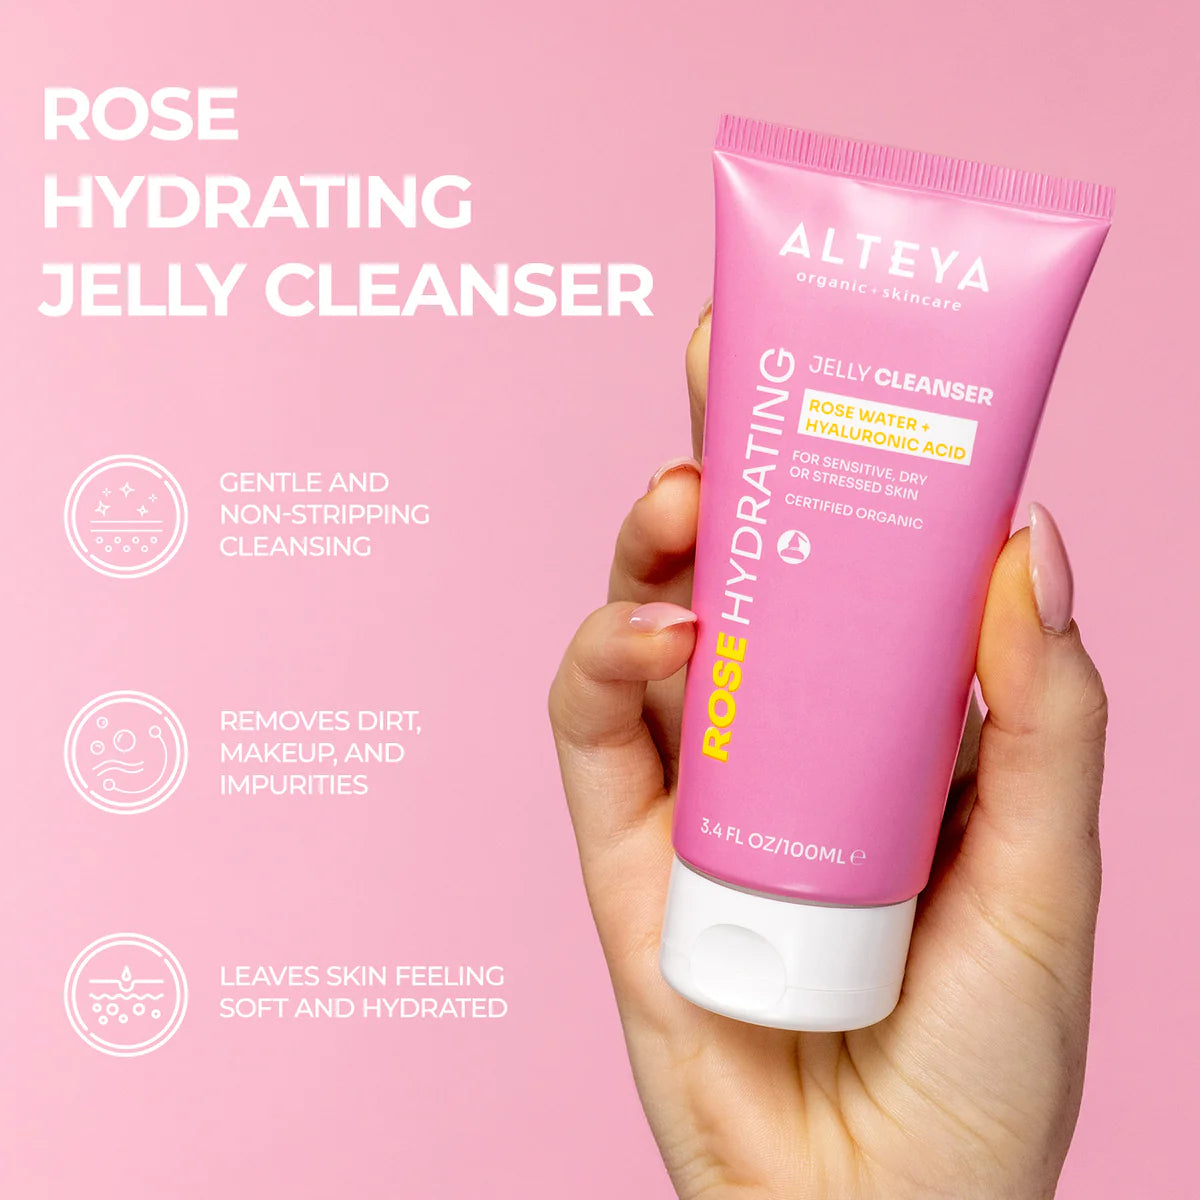 The Alteya Organics Rose Hydrating Jelly Cleanser, enriched with organic rose water and hyaluronic acid, is a gentle and effective cleanser that nourishes and hydrates the skin.